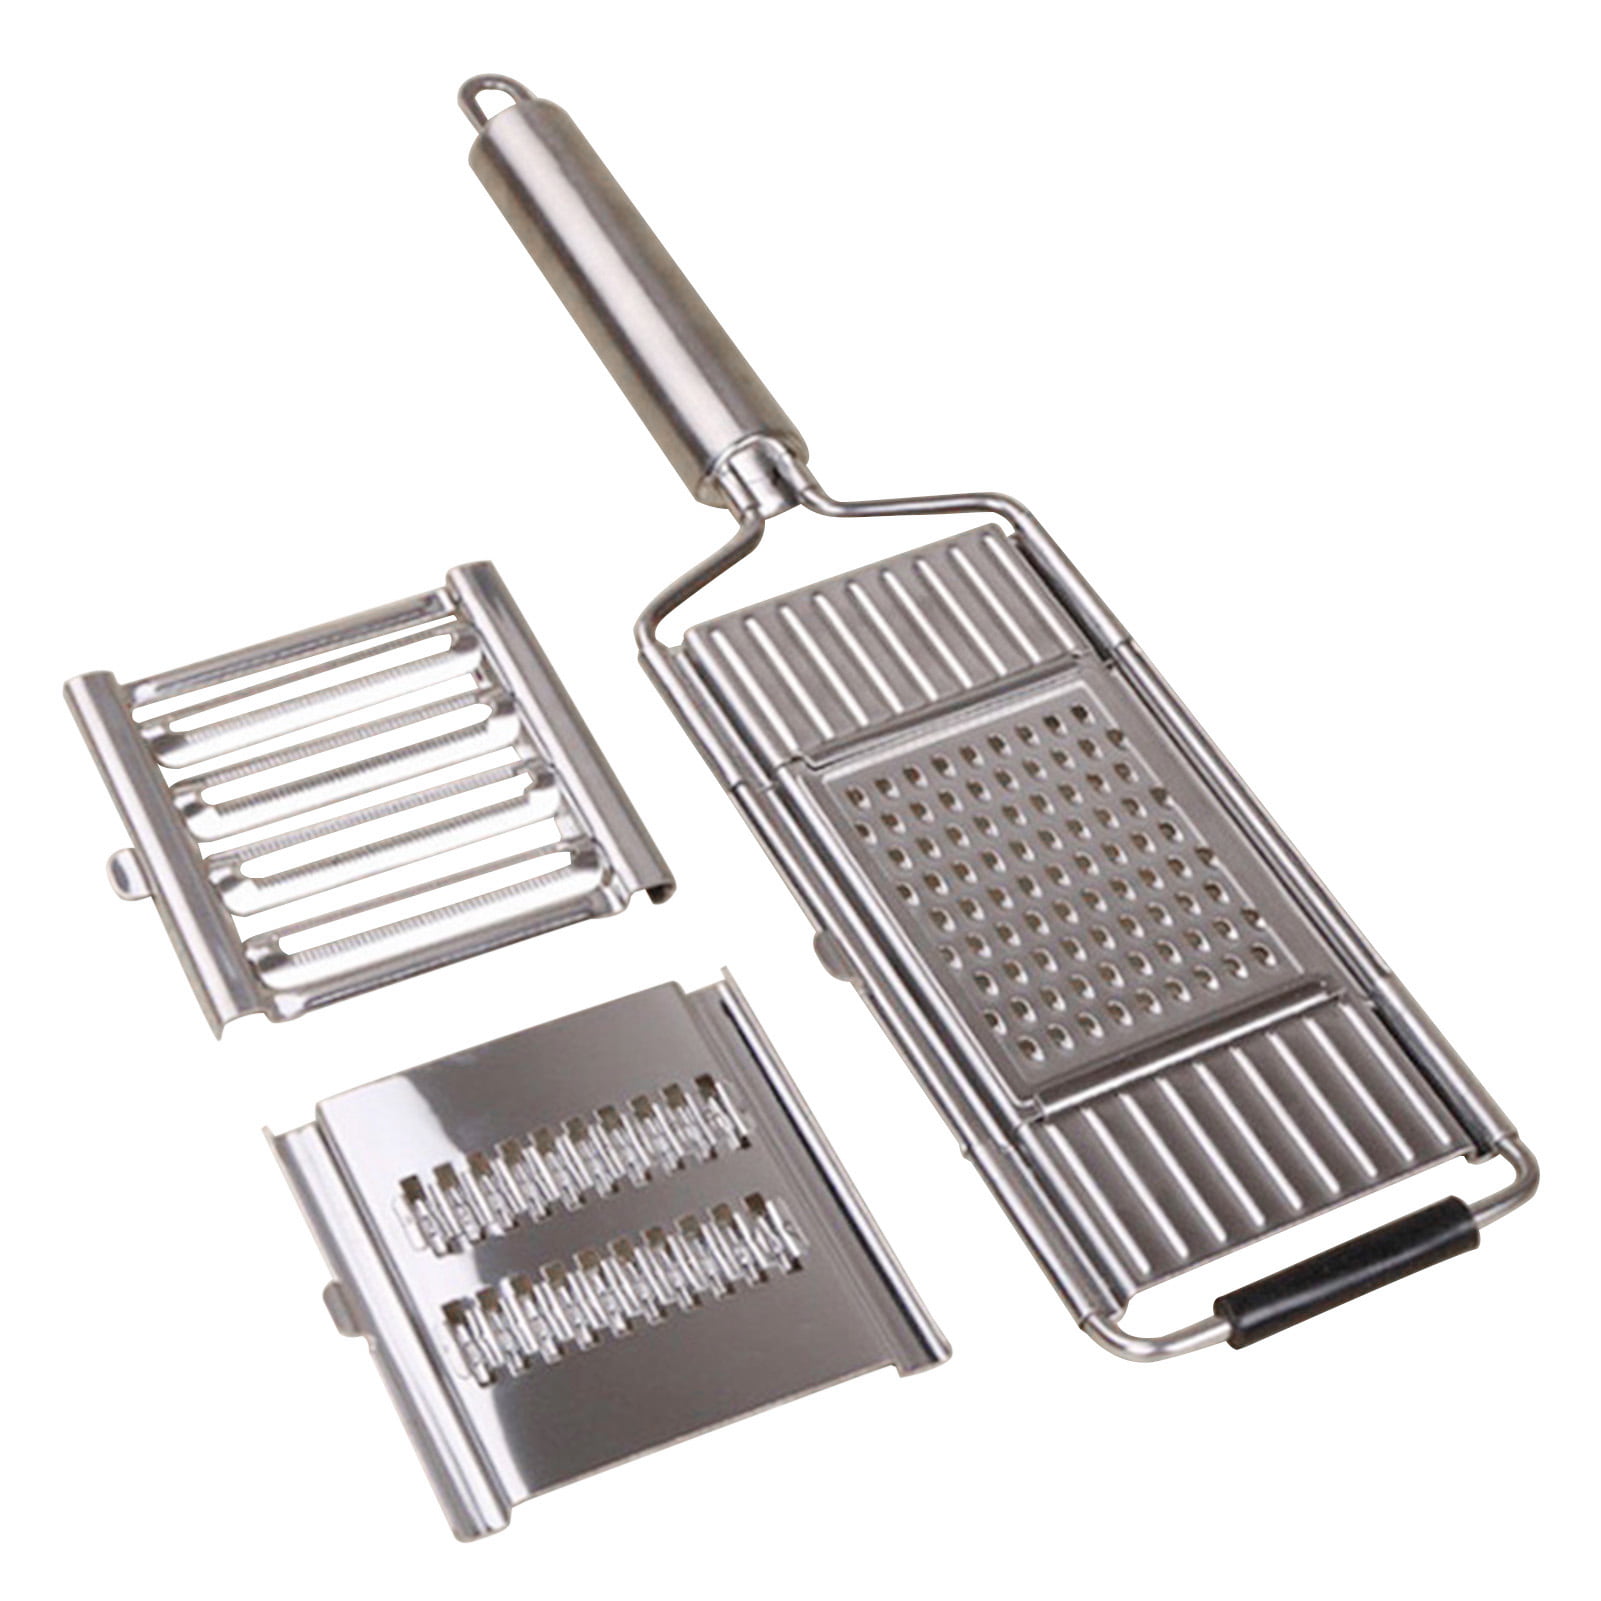 JUPITER Metallic vegetable slicer and cheese grater attachment for